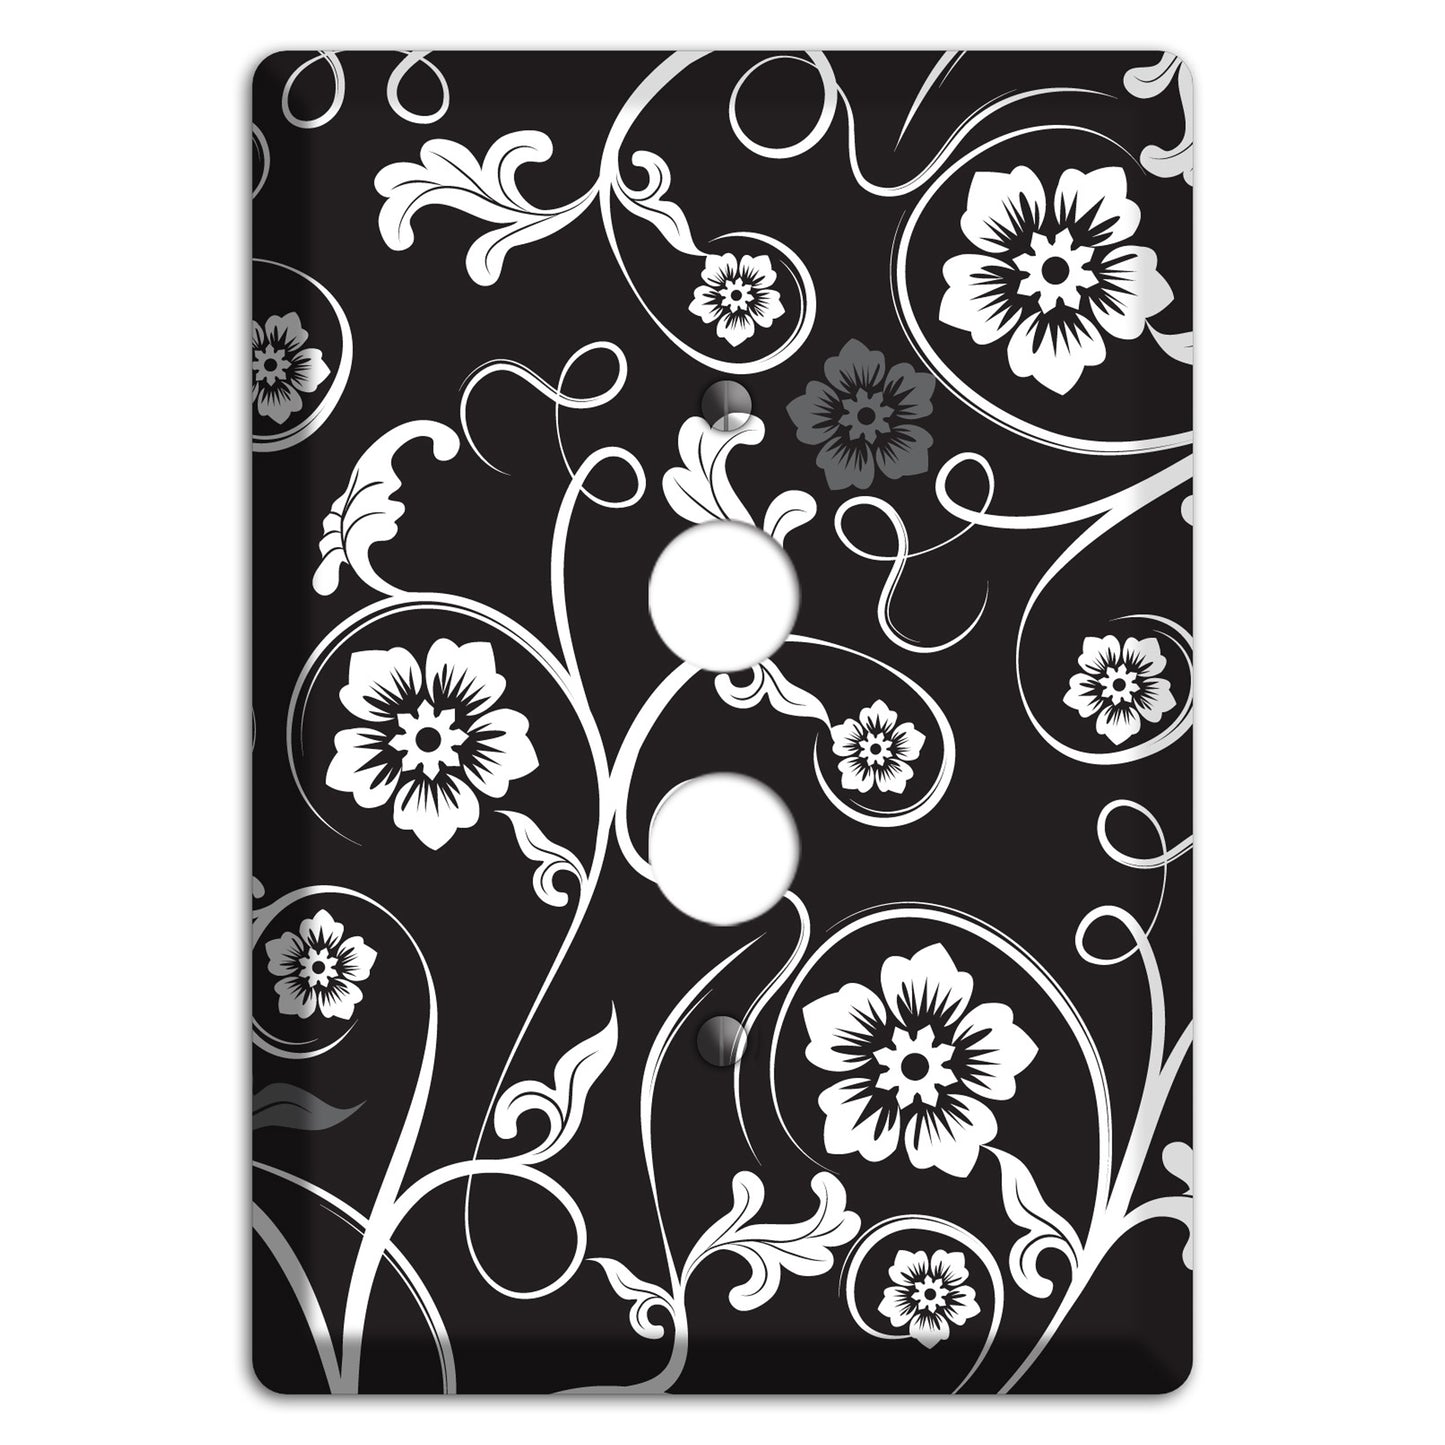 Black with White Flower Sprig 1 Pushbutton Wallplate